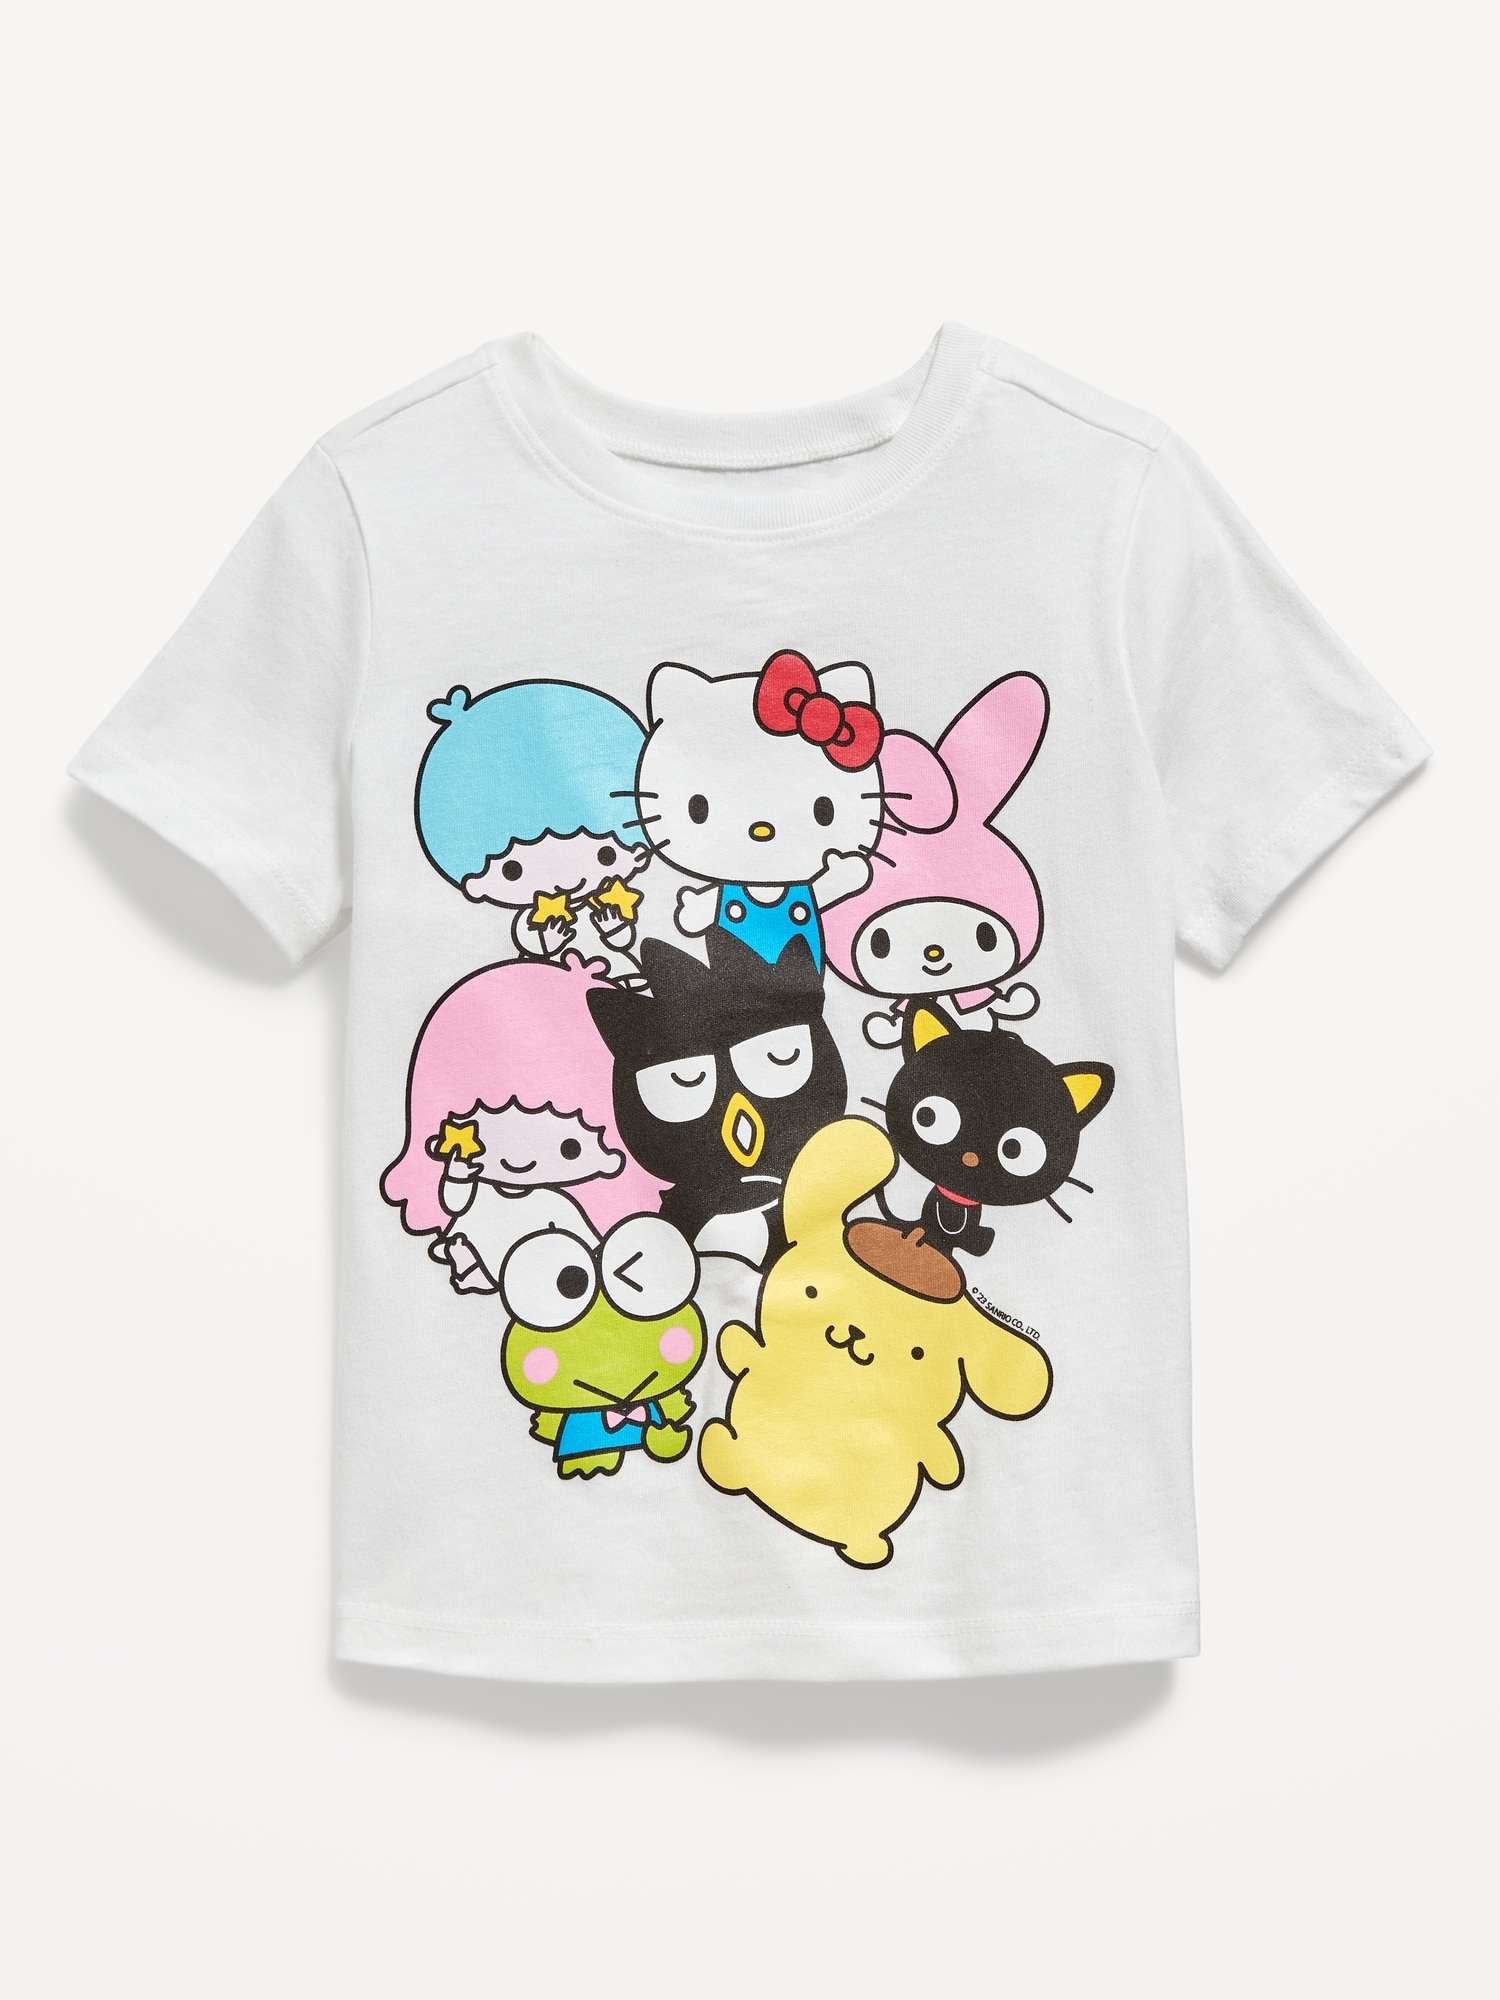 Matching Hello Kitty® Graphic T-Shirt for Toddler Girls